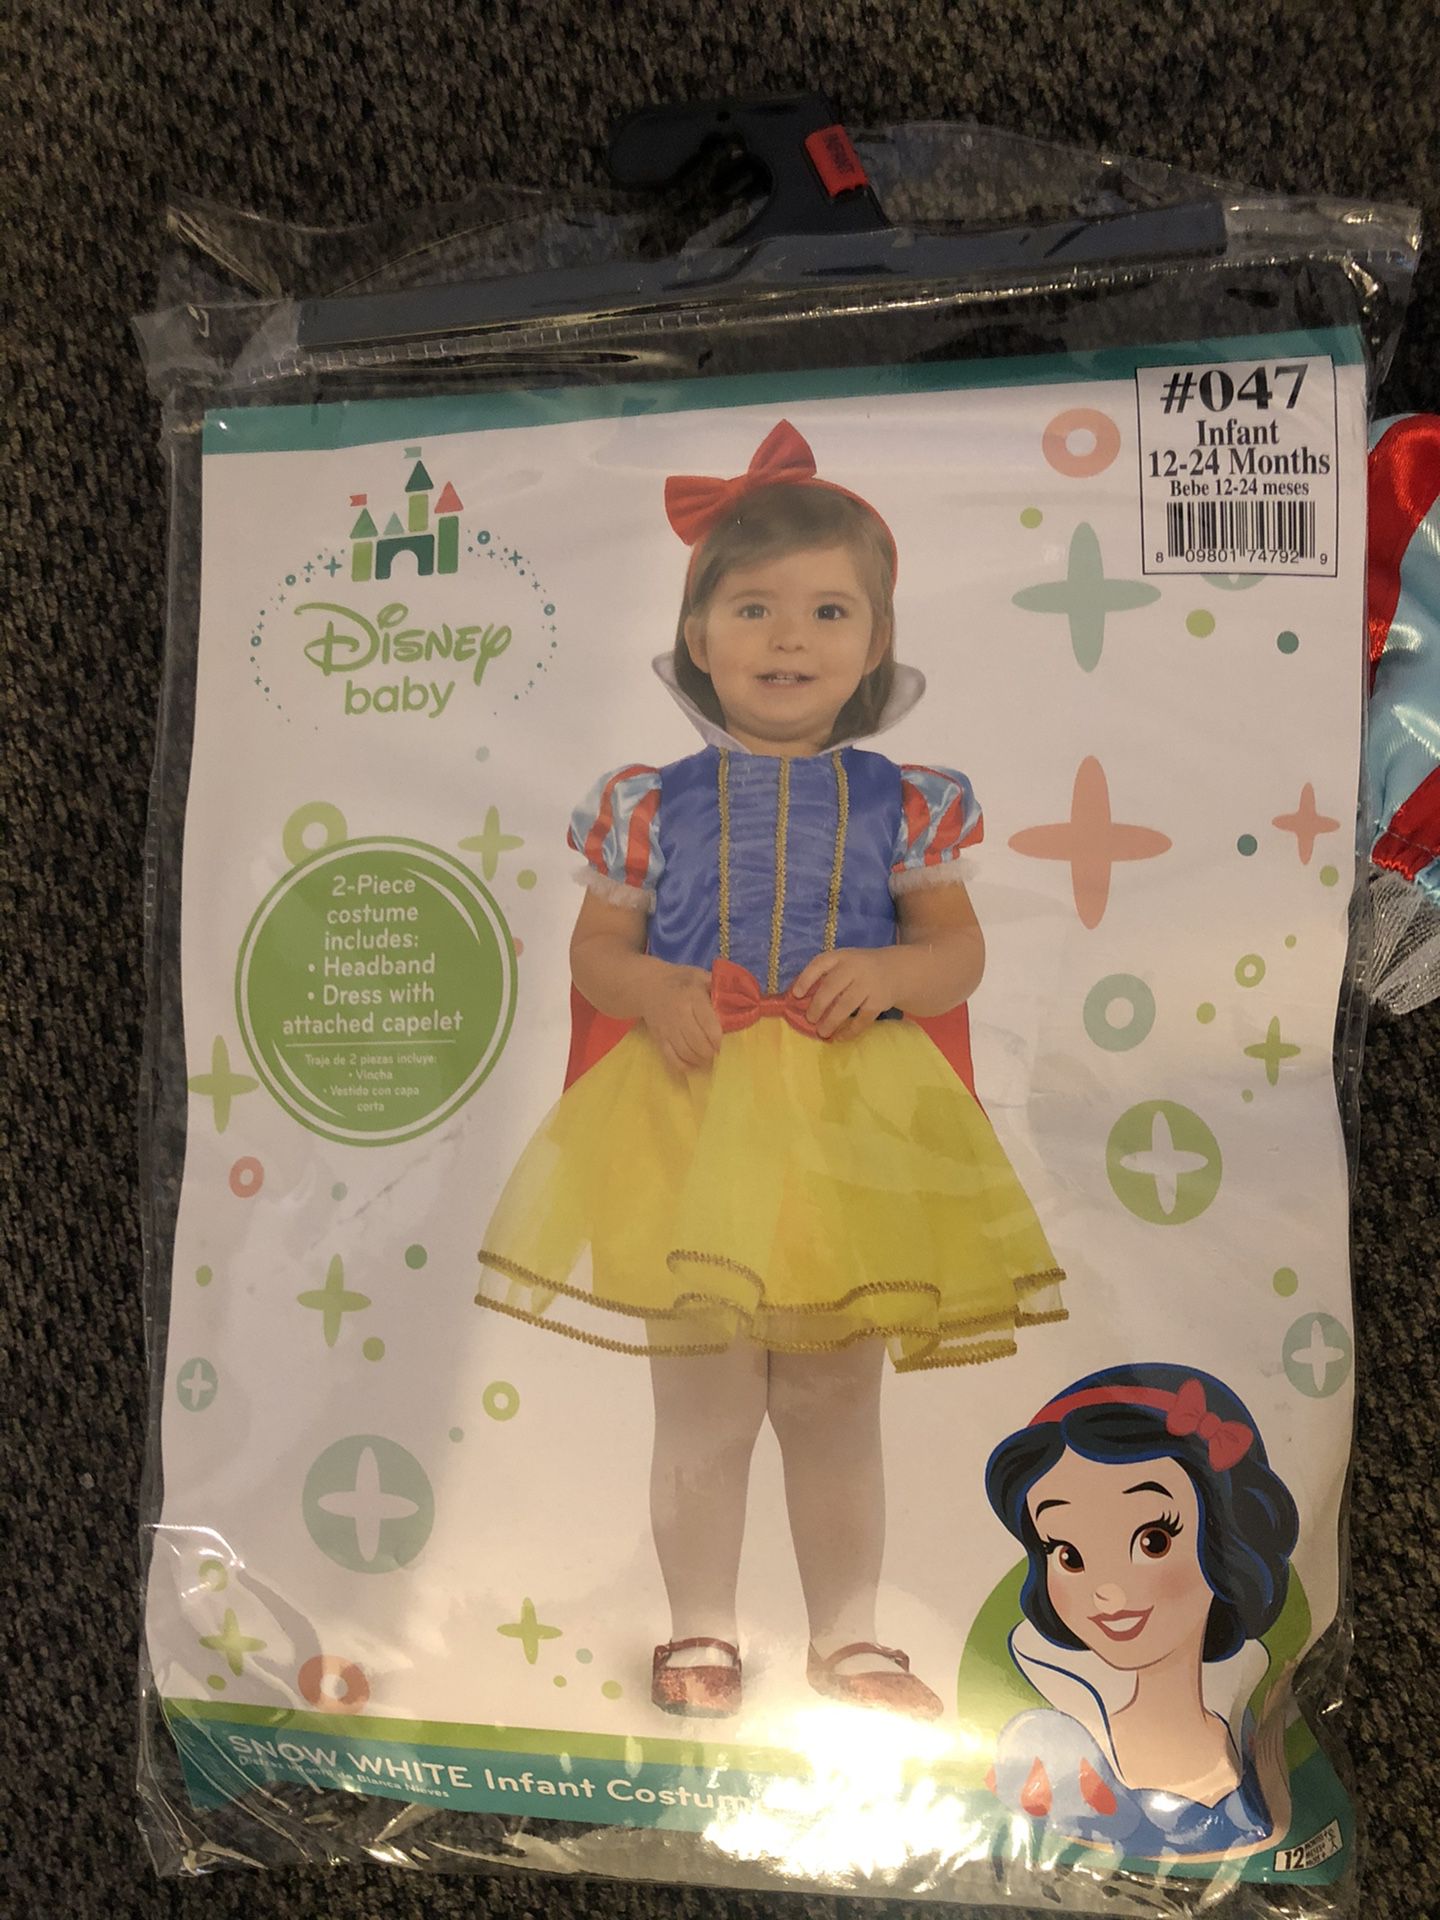 Snowhite costume for infant 12-24 months